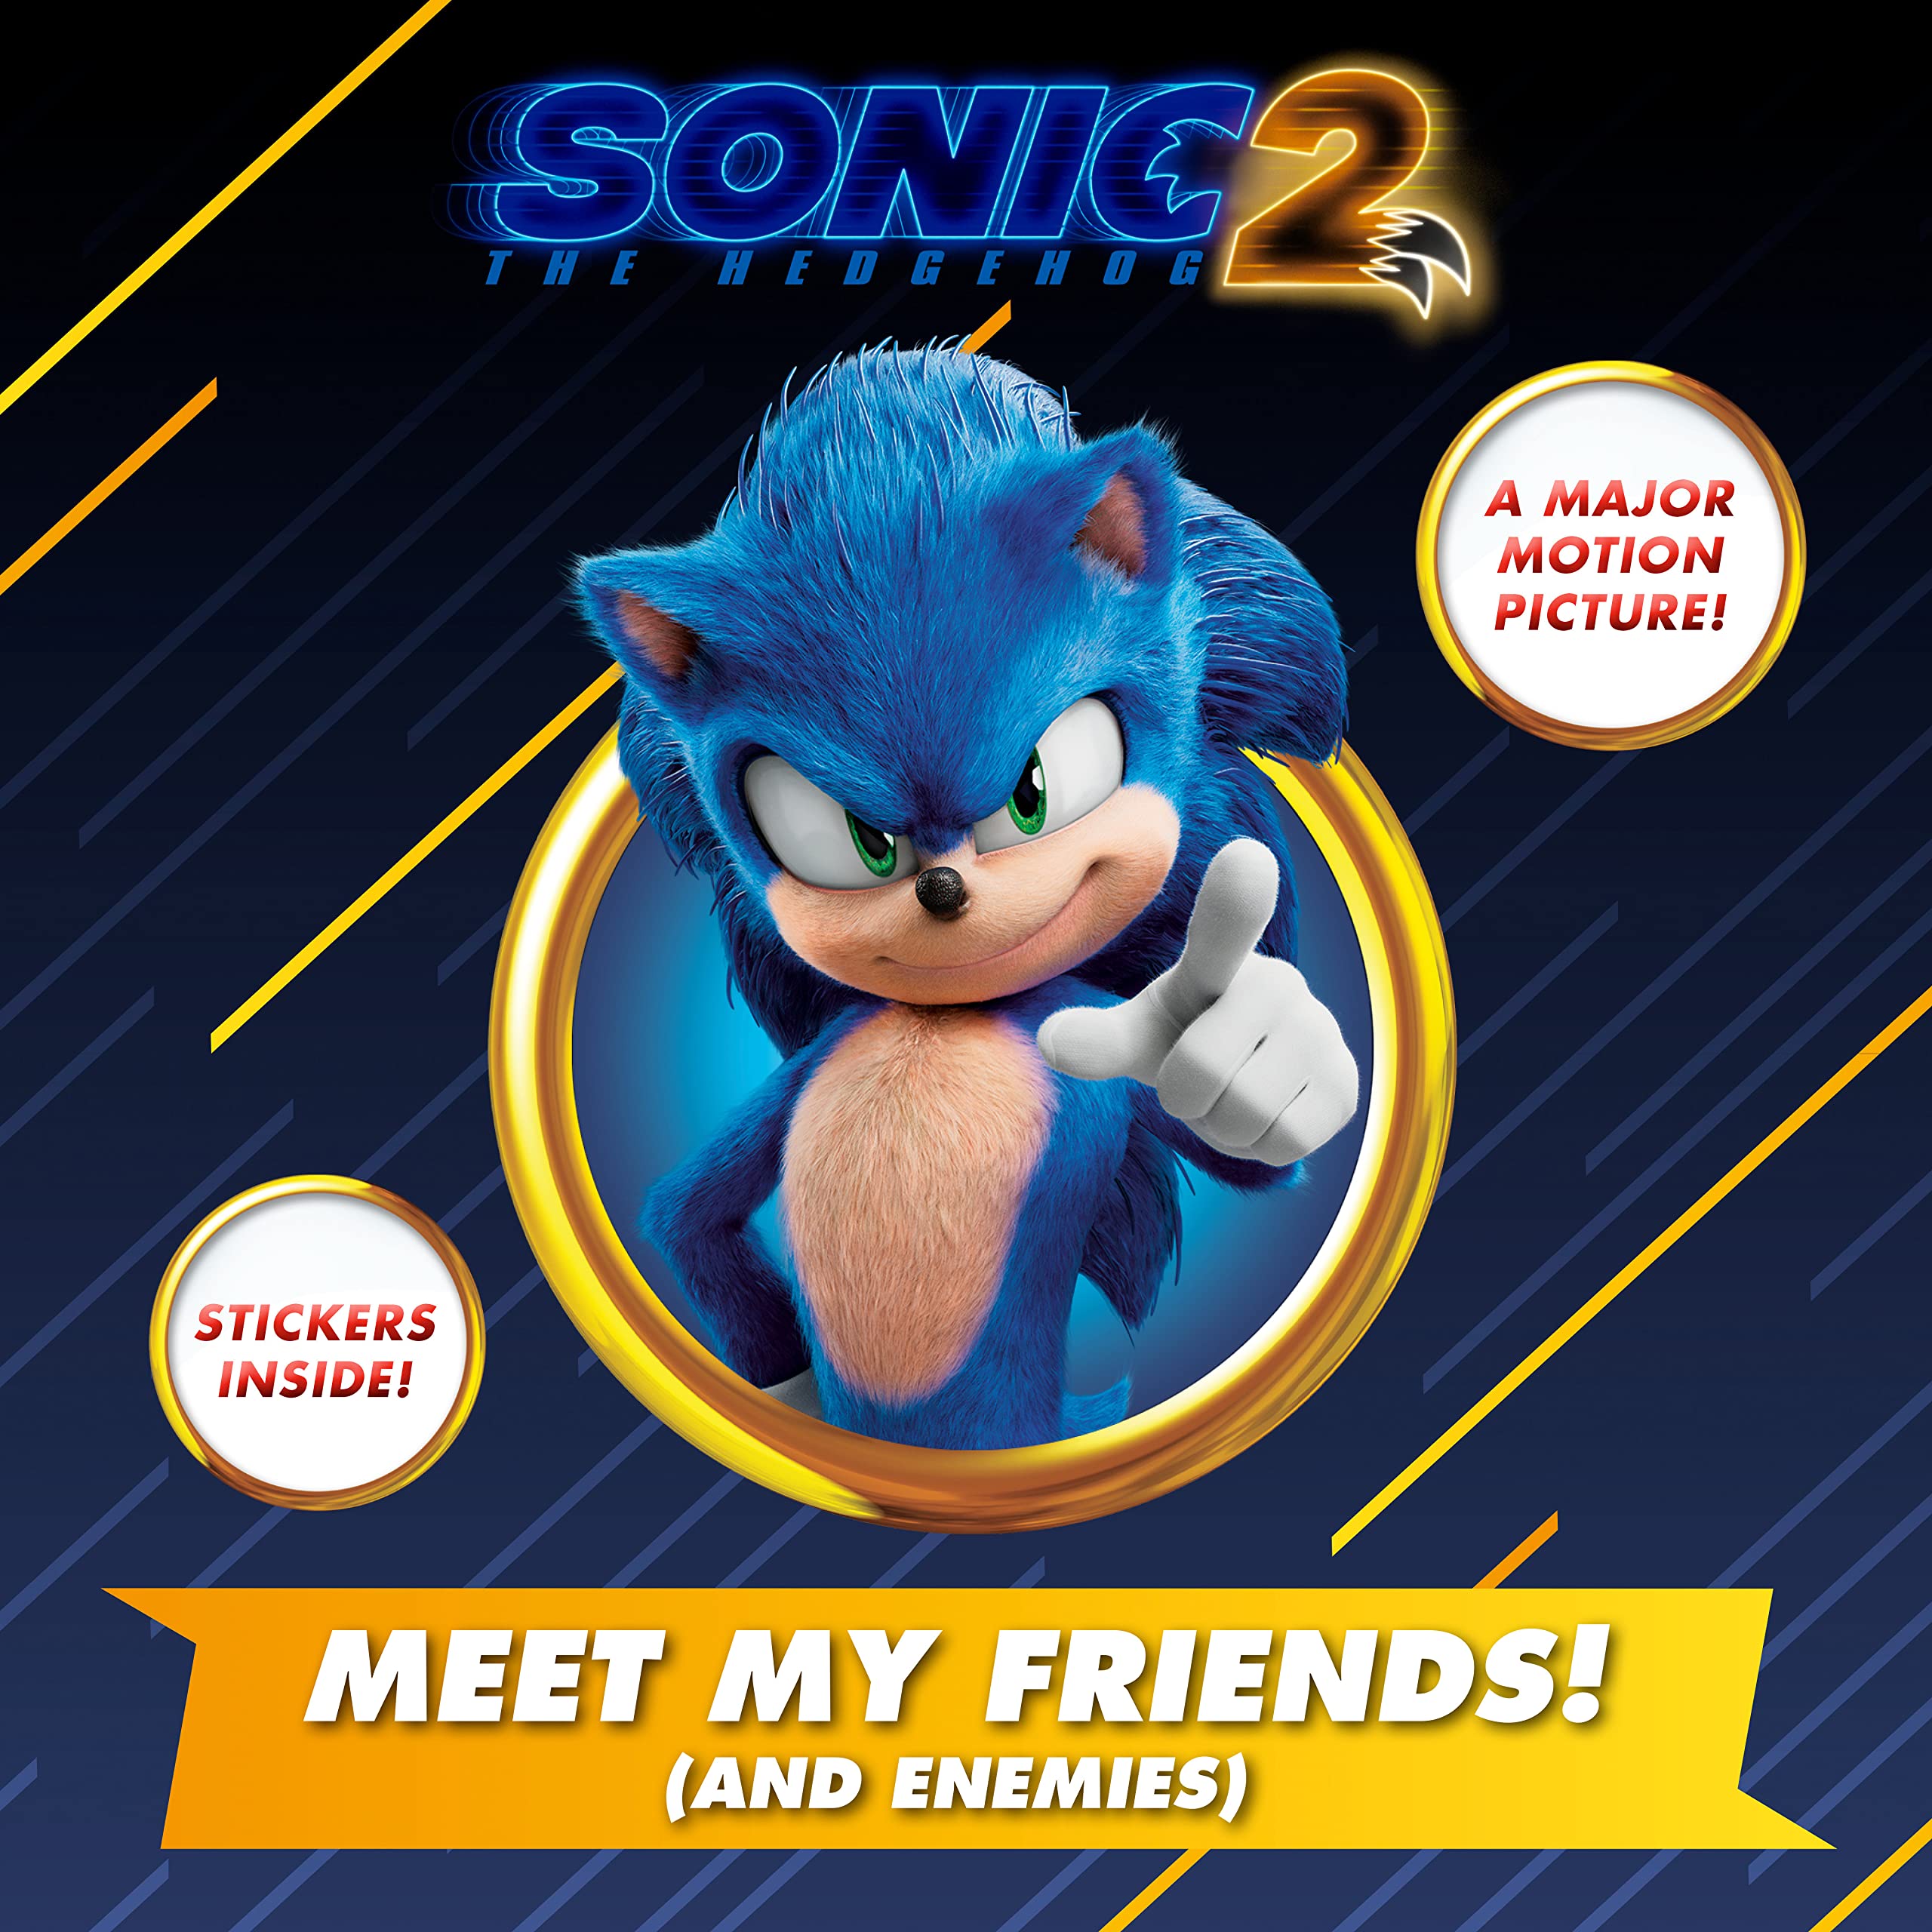 Sonic The Hedgehog 2 Activity Pack